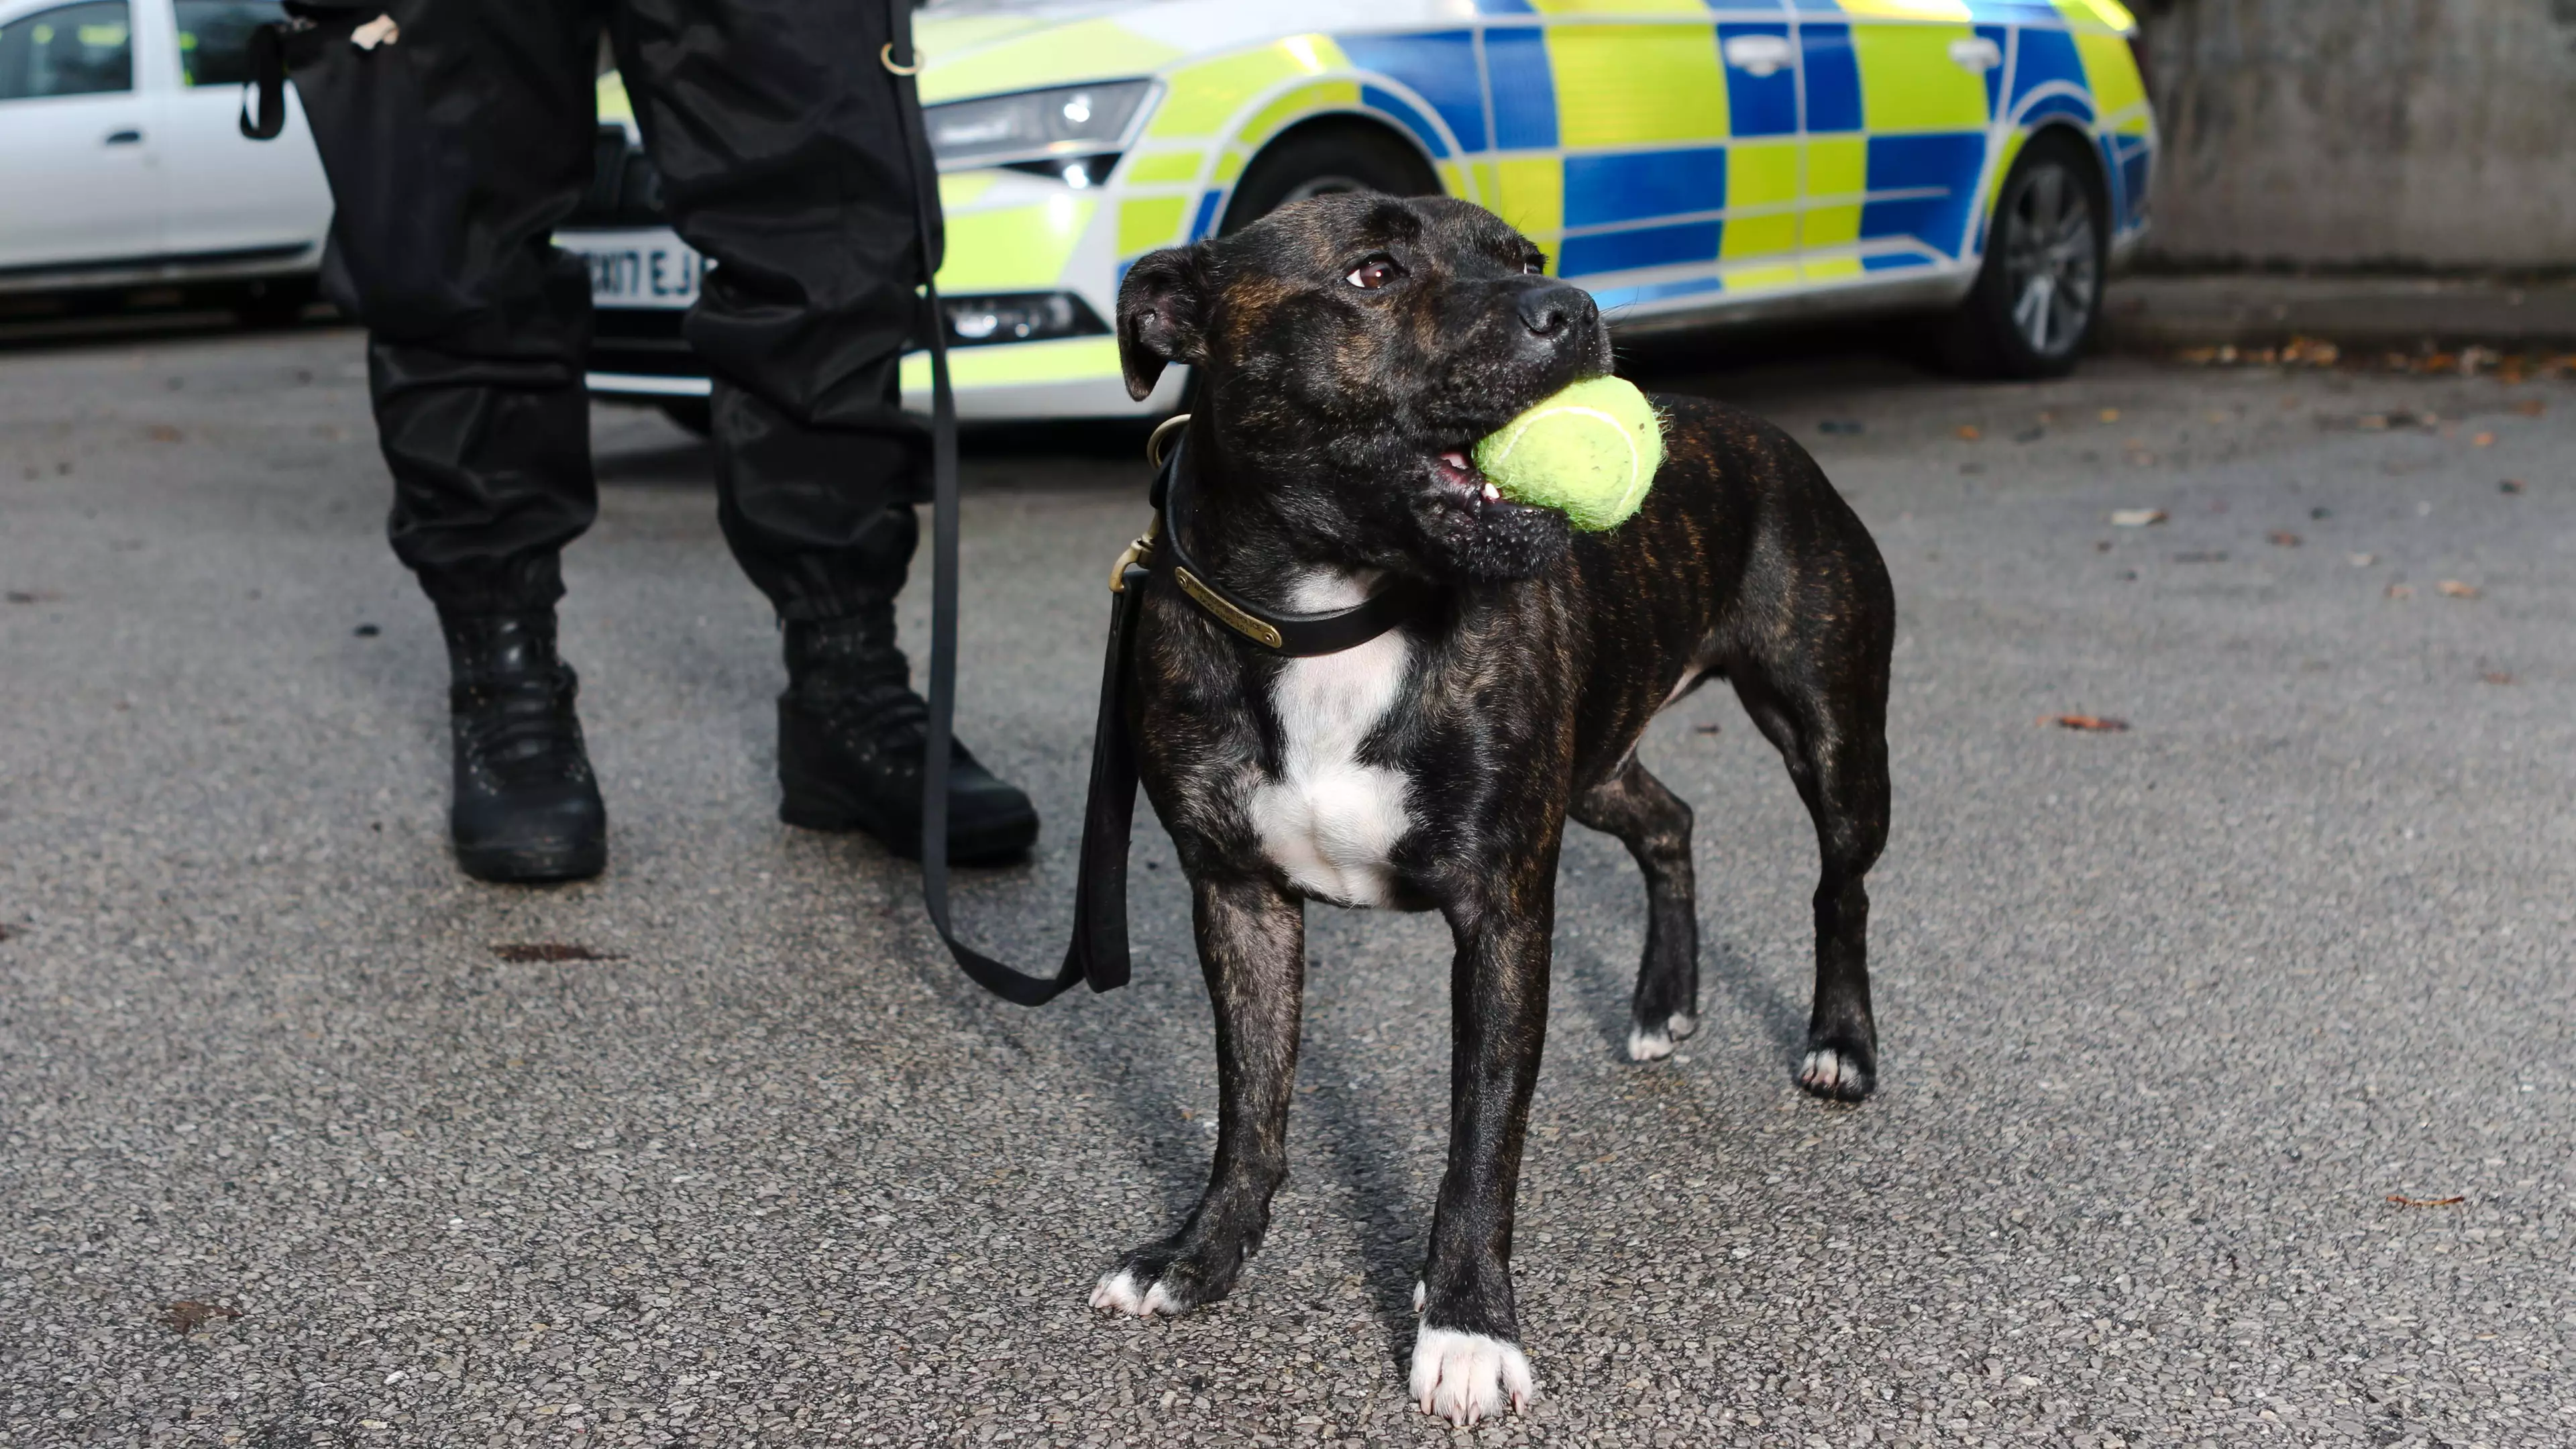 Staffy Rescue Dog Becomes One Of The First Of Its Breed To Join UK Police Force